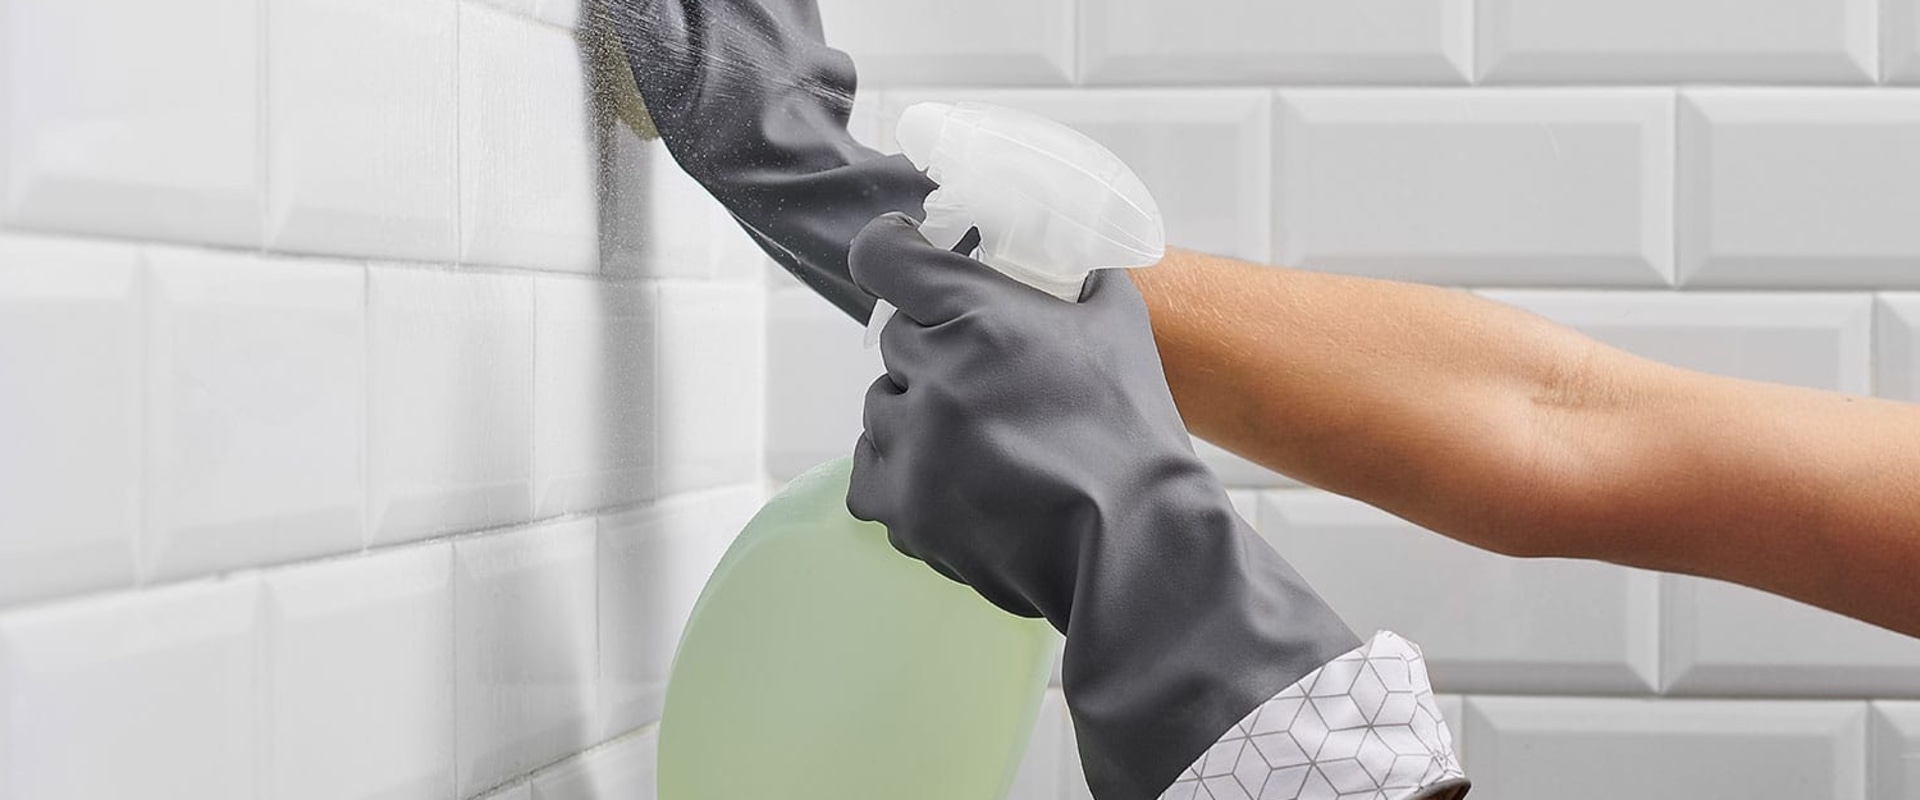 What does standard cleaning mean?